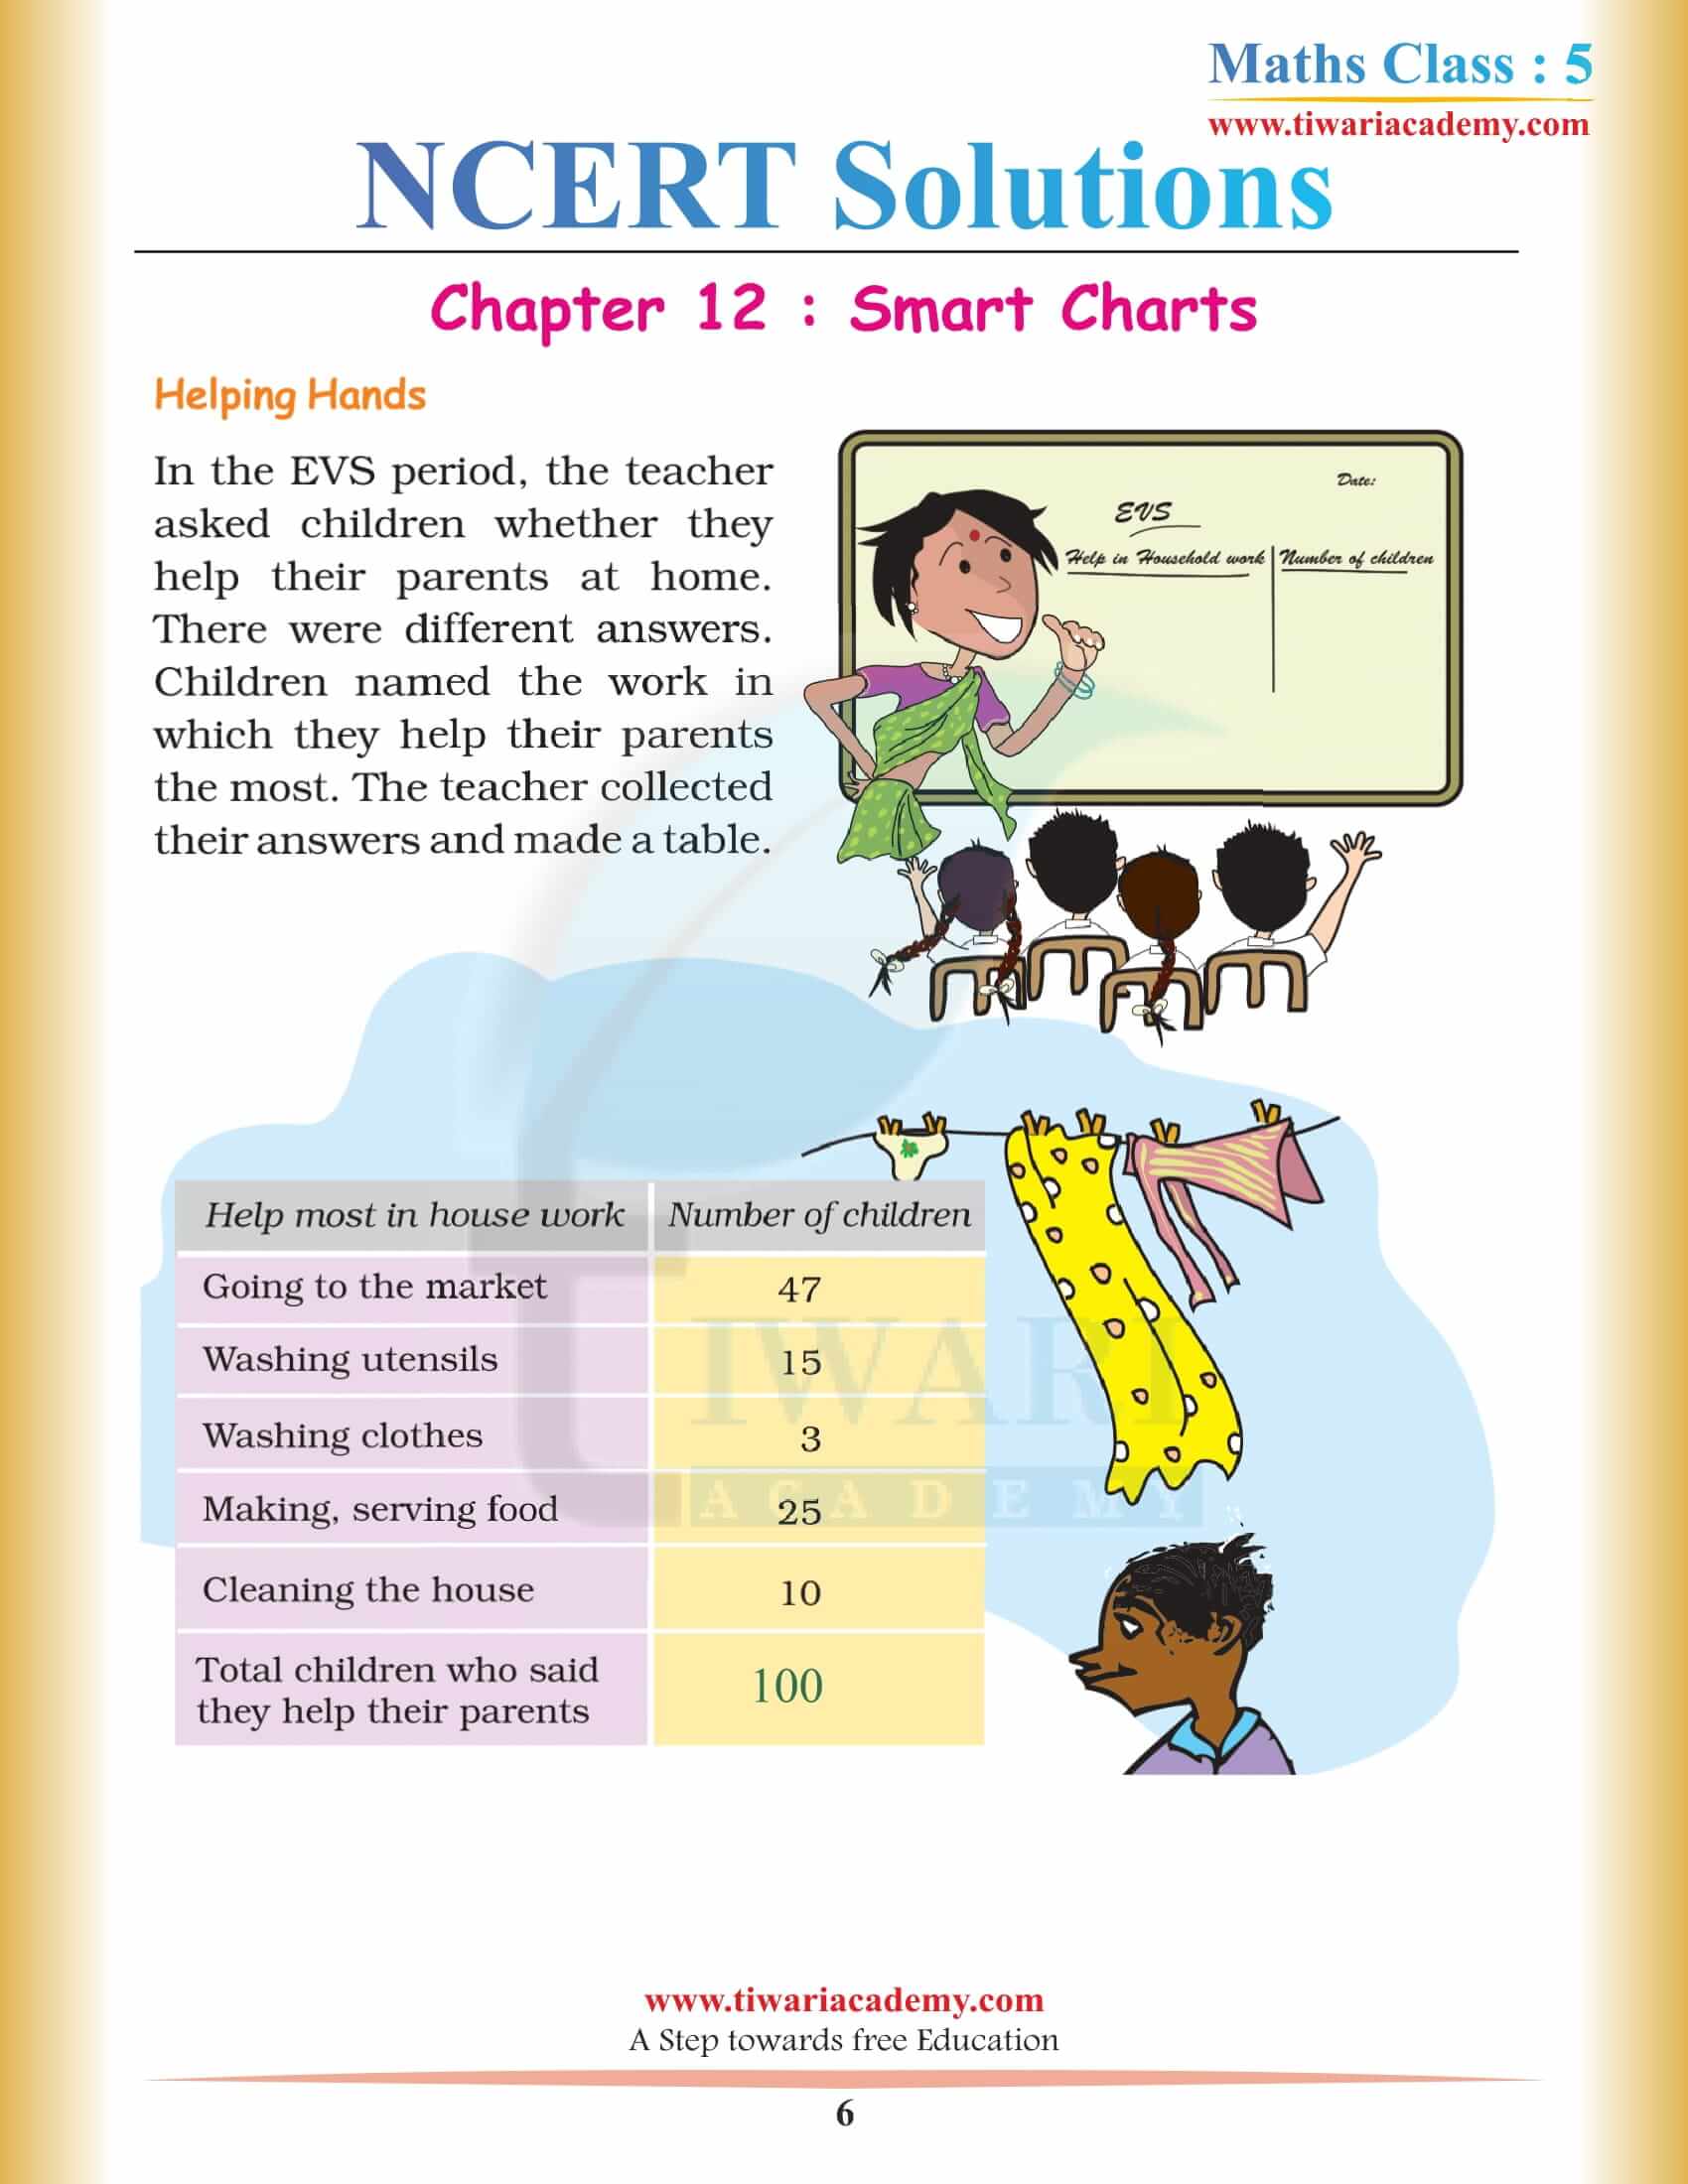 NCERT Solutions for Class 5 Maths Chapter 12 free answers